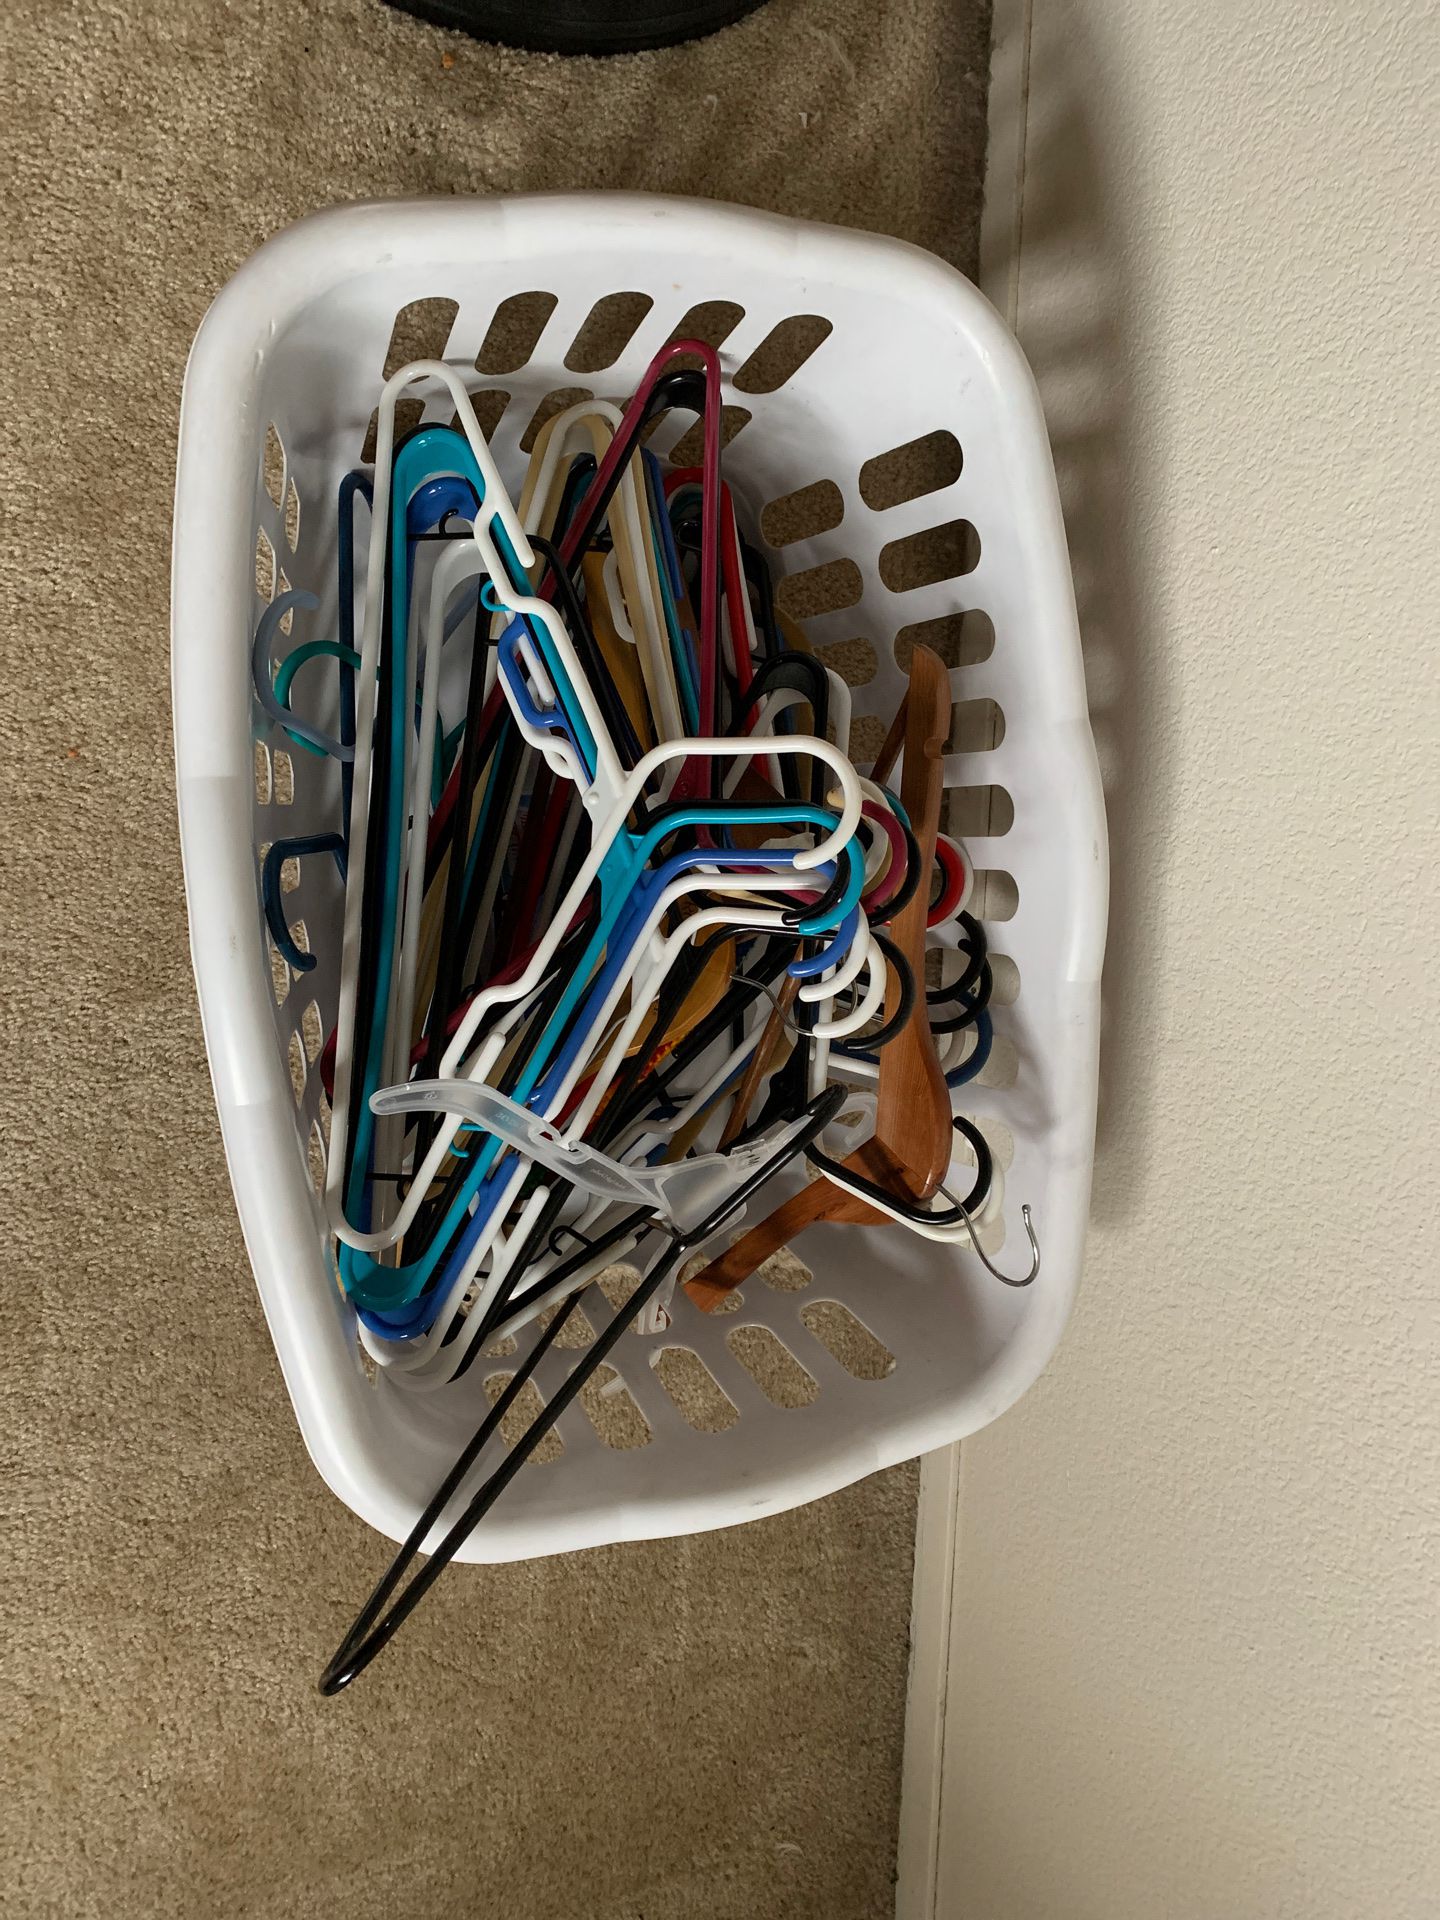 Free! Hangers! And a laundry basket